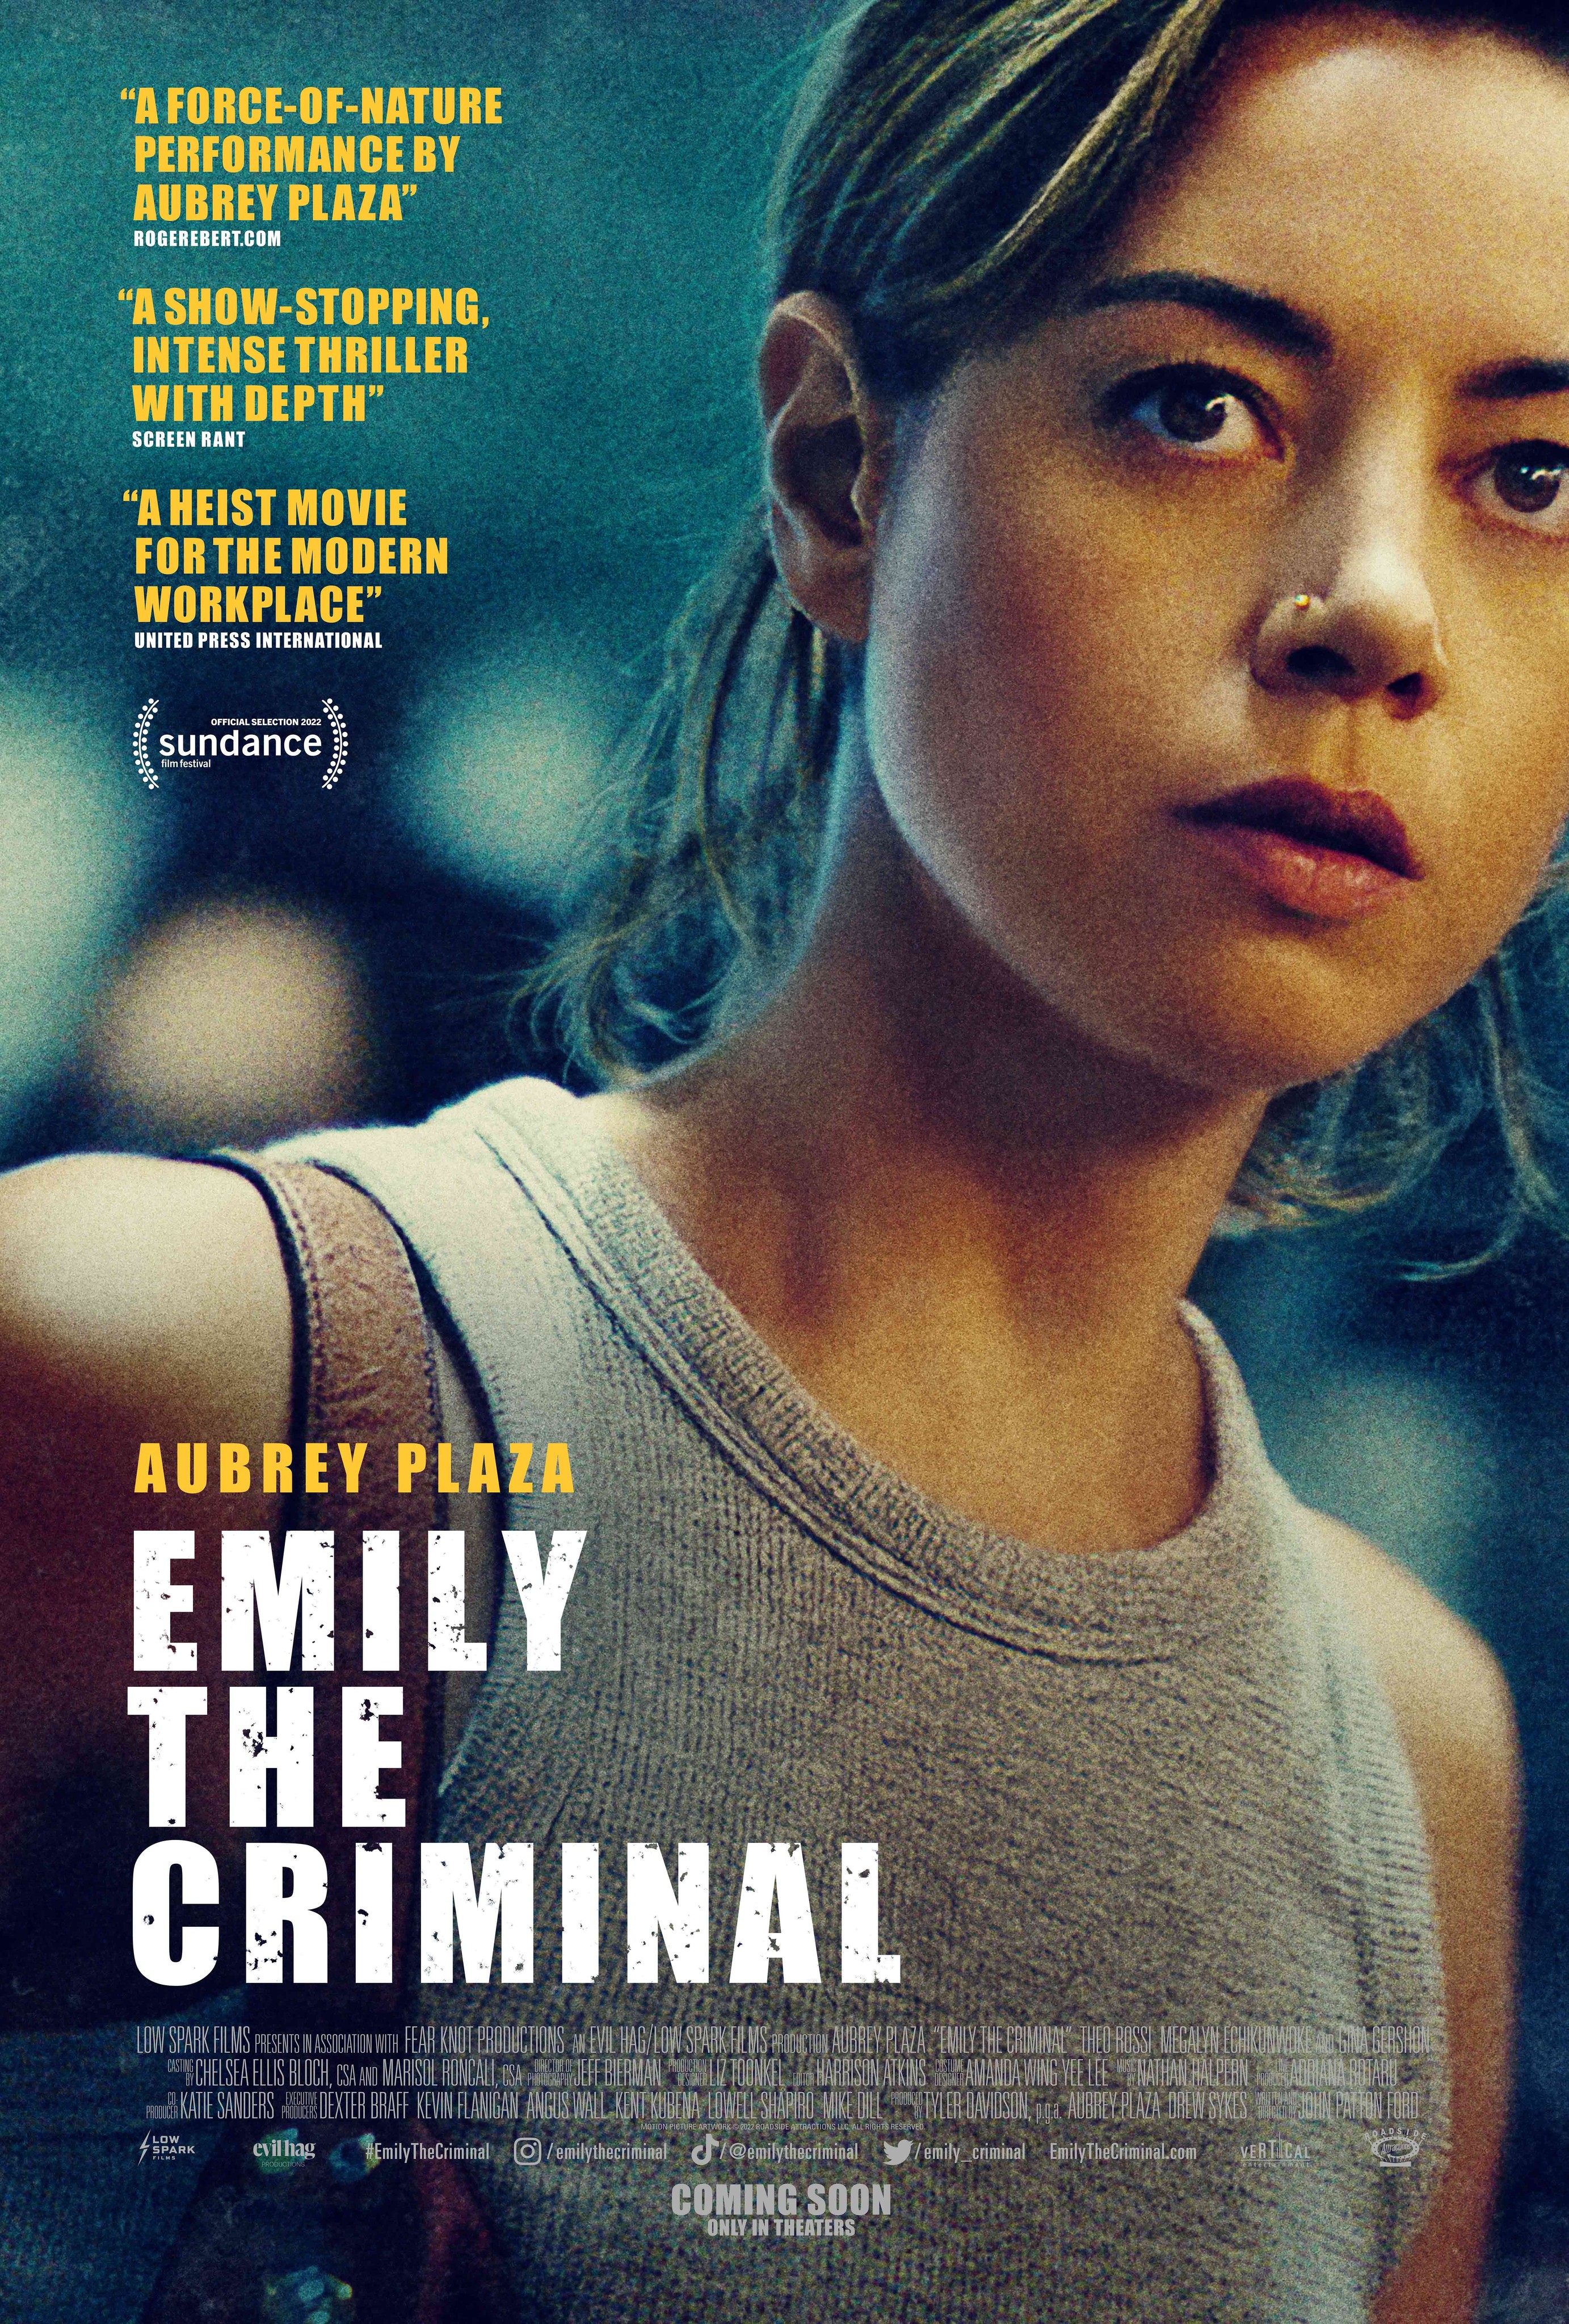 Movie poster for "Emily the Criminal."L